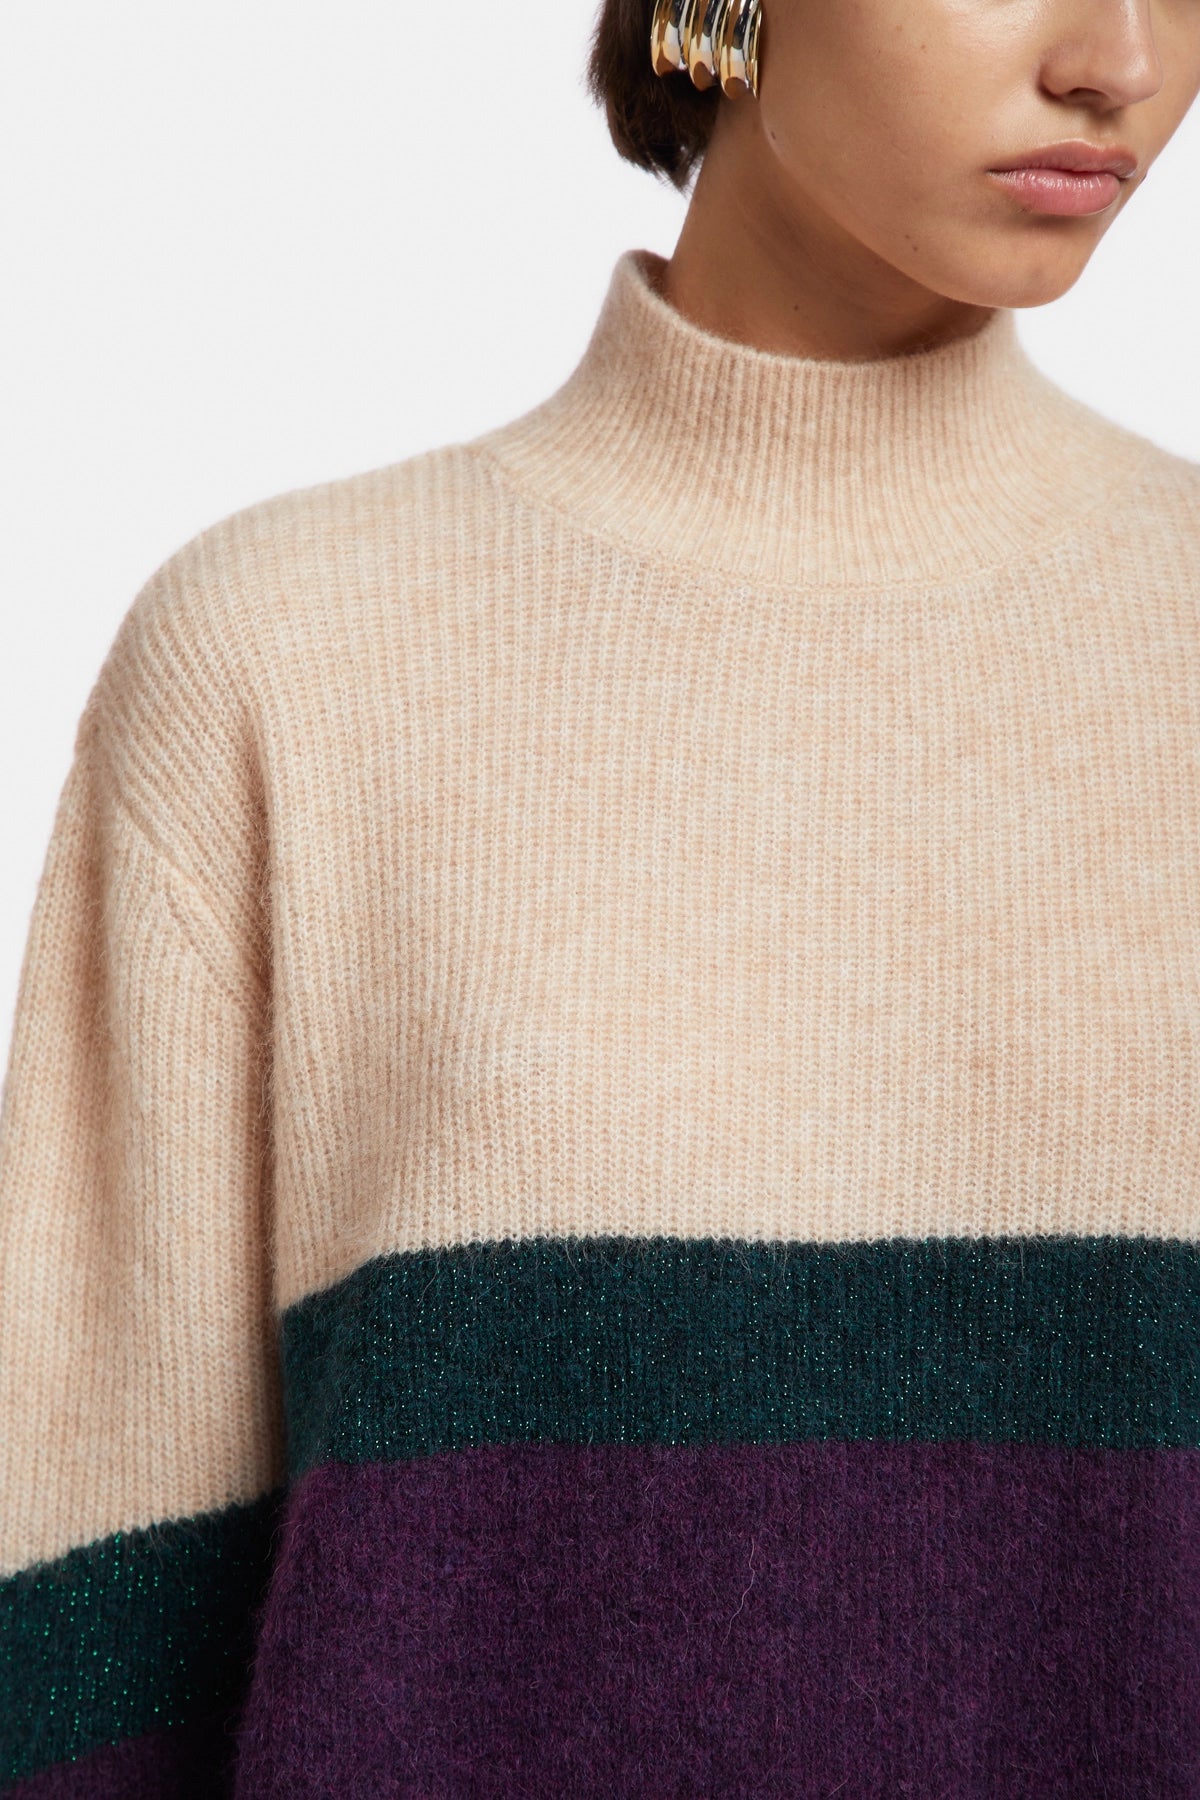 Funnel neck sweater and Lurex inserts